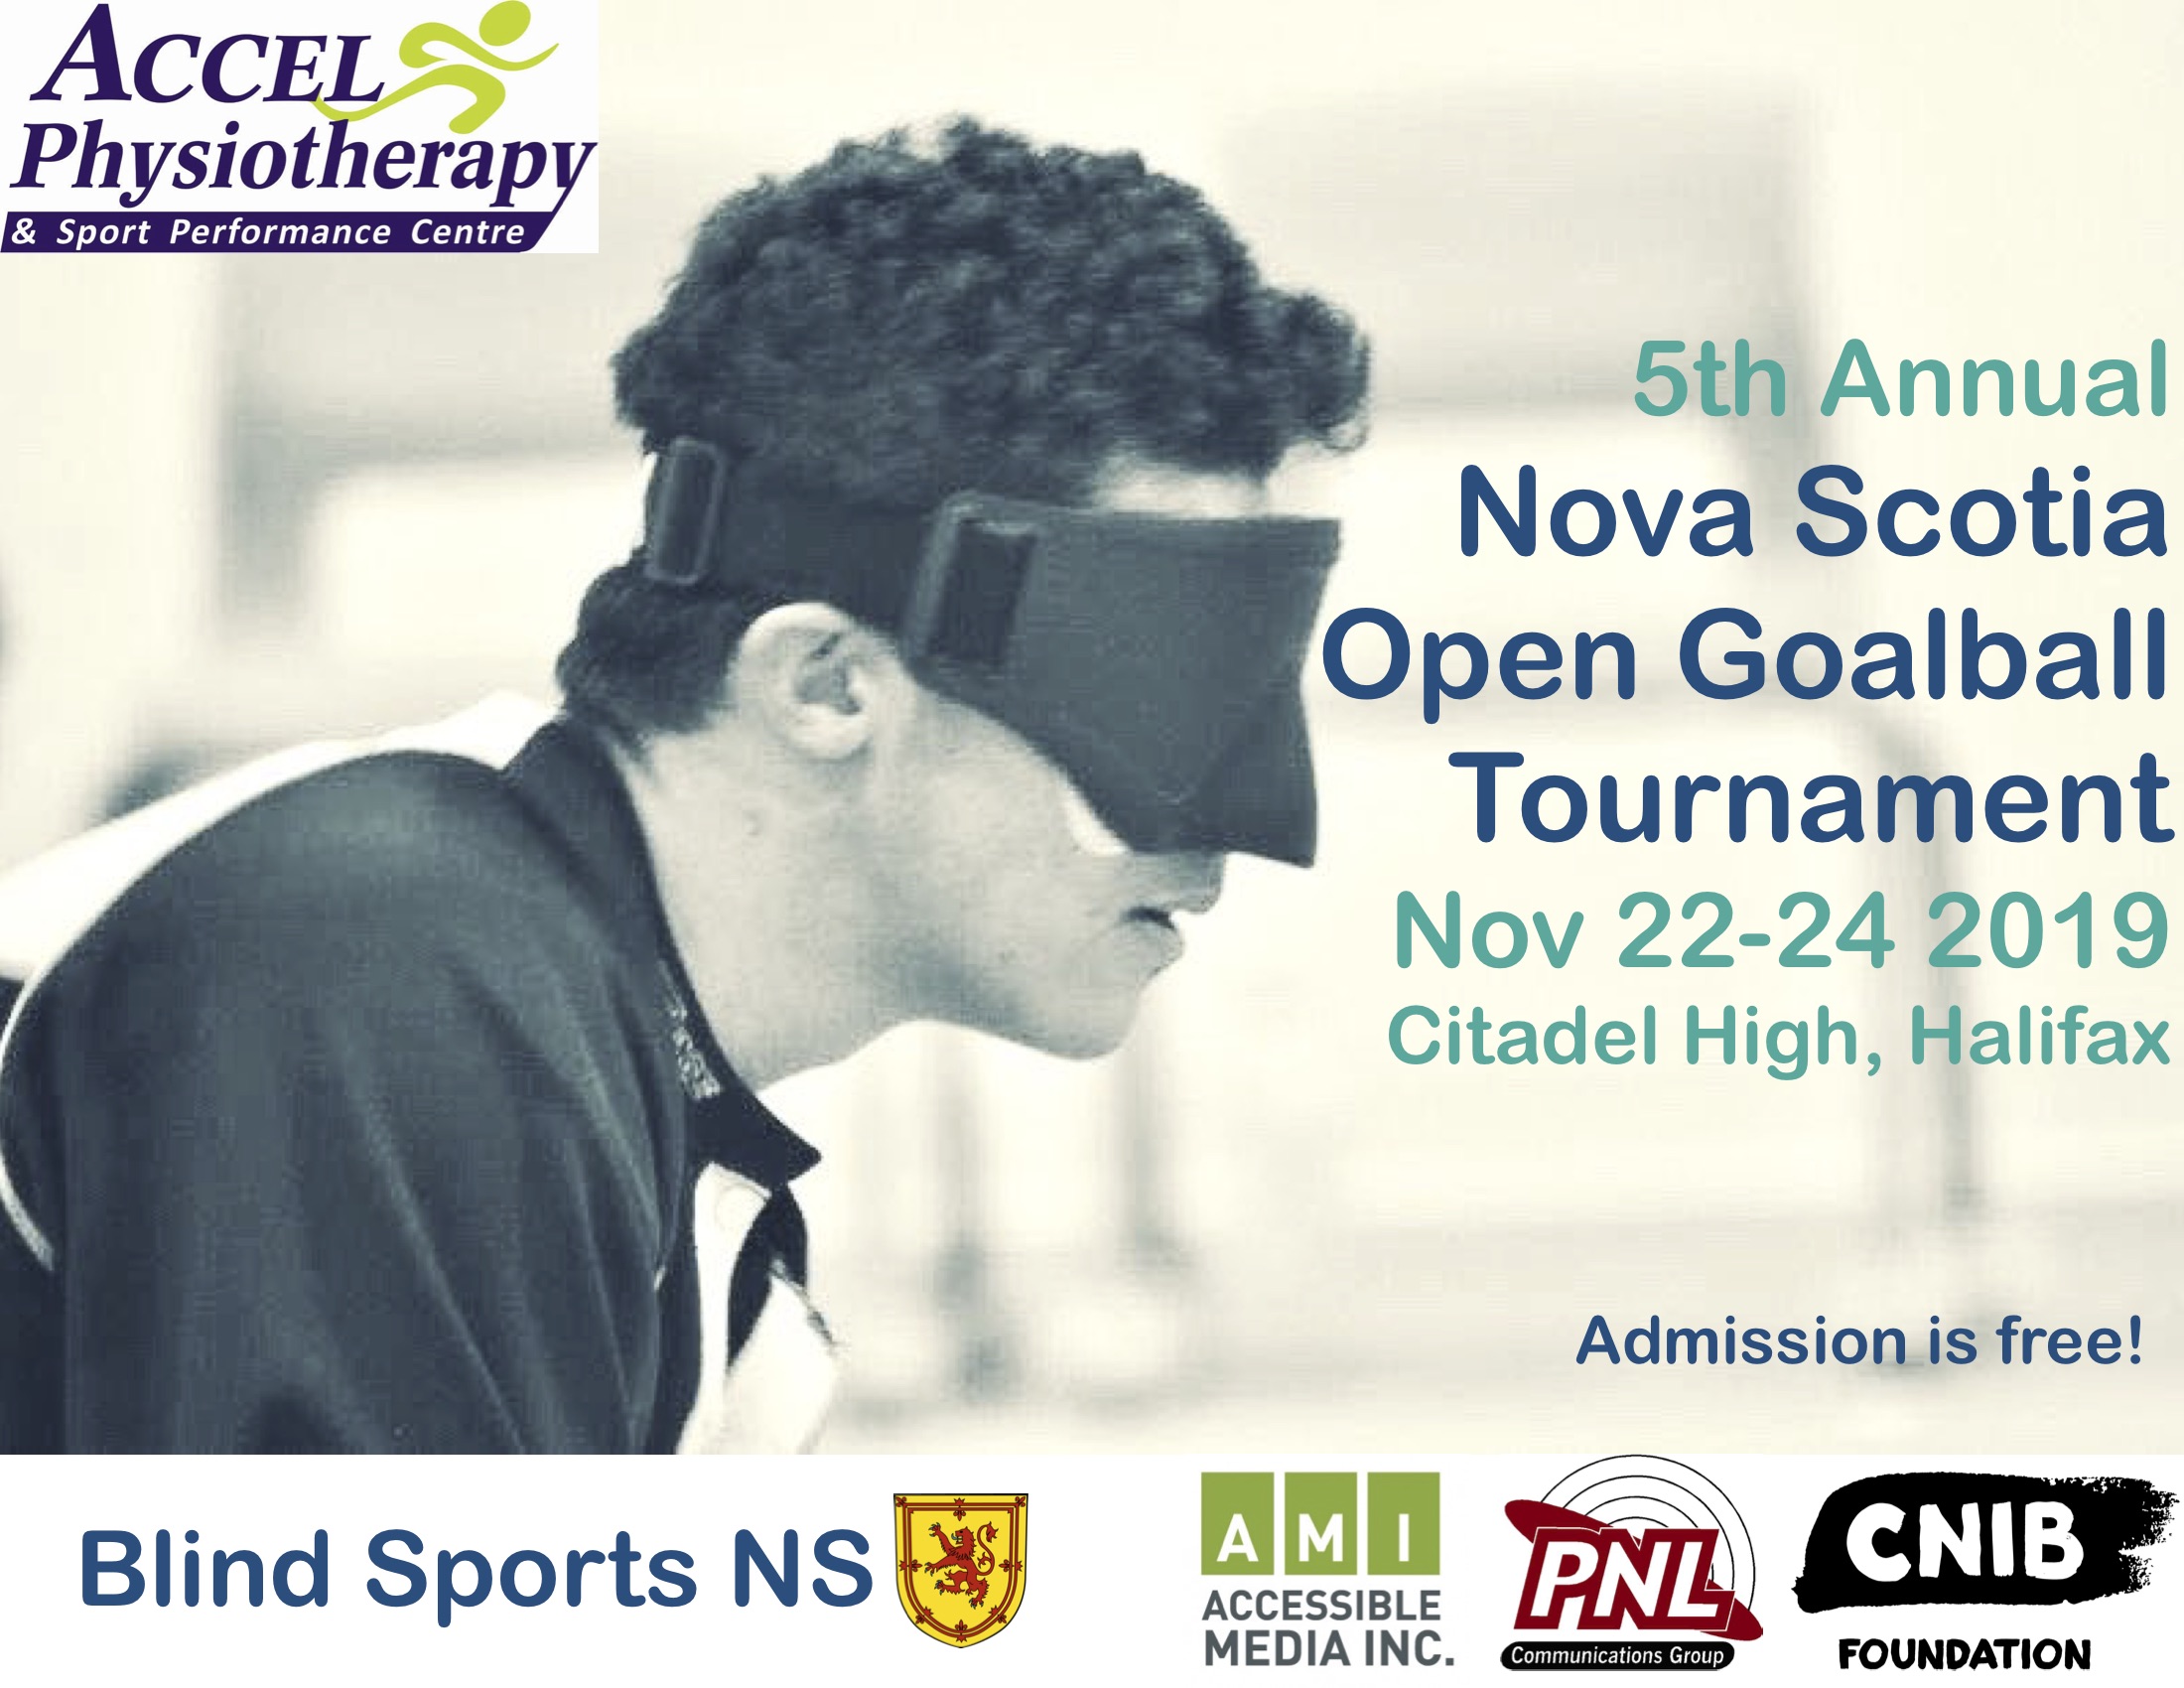 Poster Description: A shoulders up profile photo of a person with short curly hair and wearing goalball eyeshades in deep focus. 5th Annual Nova Scotia Open Goalball Tournament Nov 22-24 2019 Citadel High, Halifax Admission is Free! Blind Sports NS and provincial coat of arms lion in yellow. Featured Sponsors logos include: Accel Physiotherapy & Sport Performance Centre; Accessible Media Inc; PNL Communications Group; CNIB Foundation.  